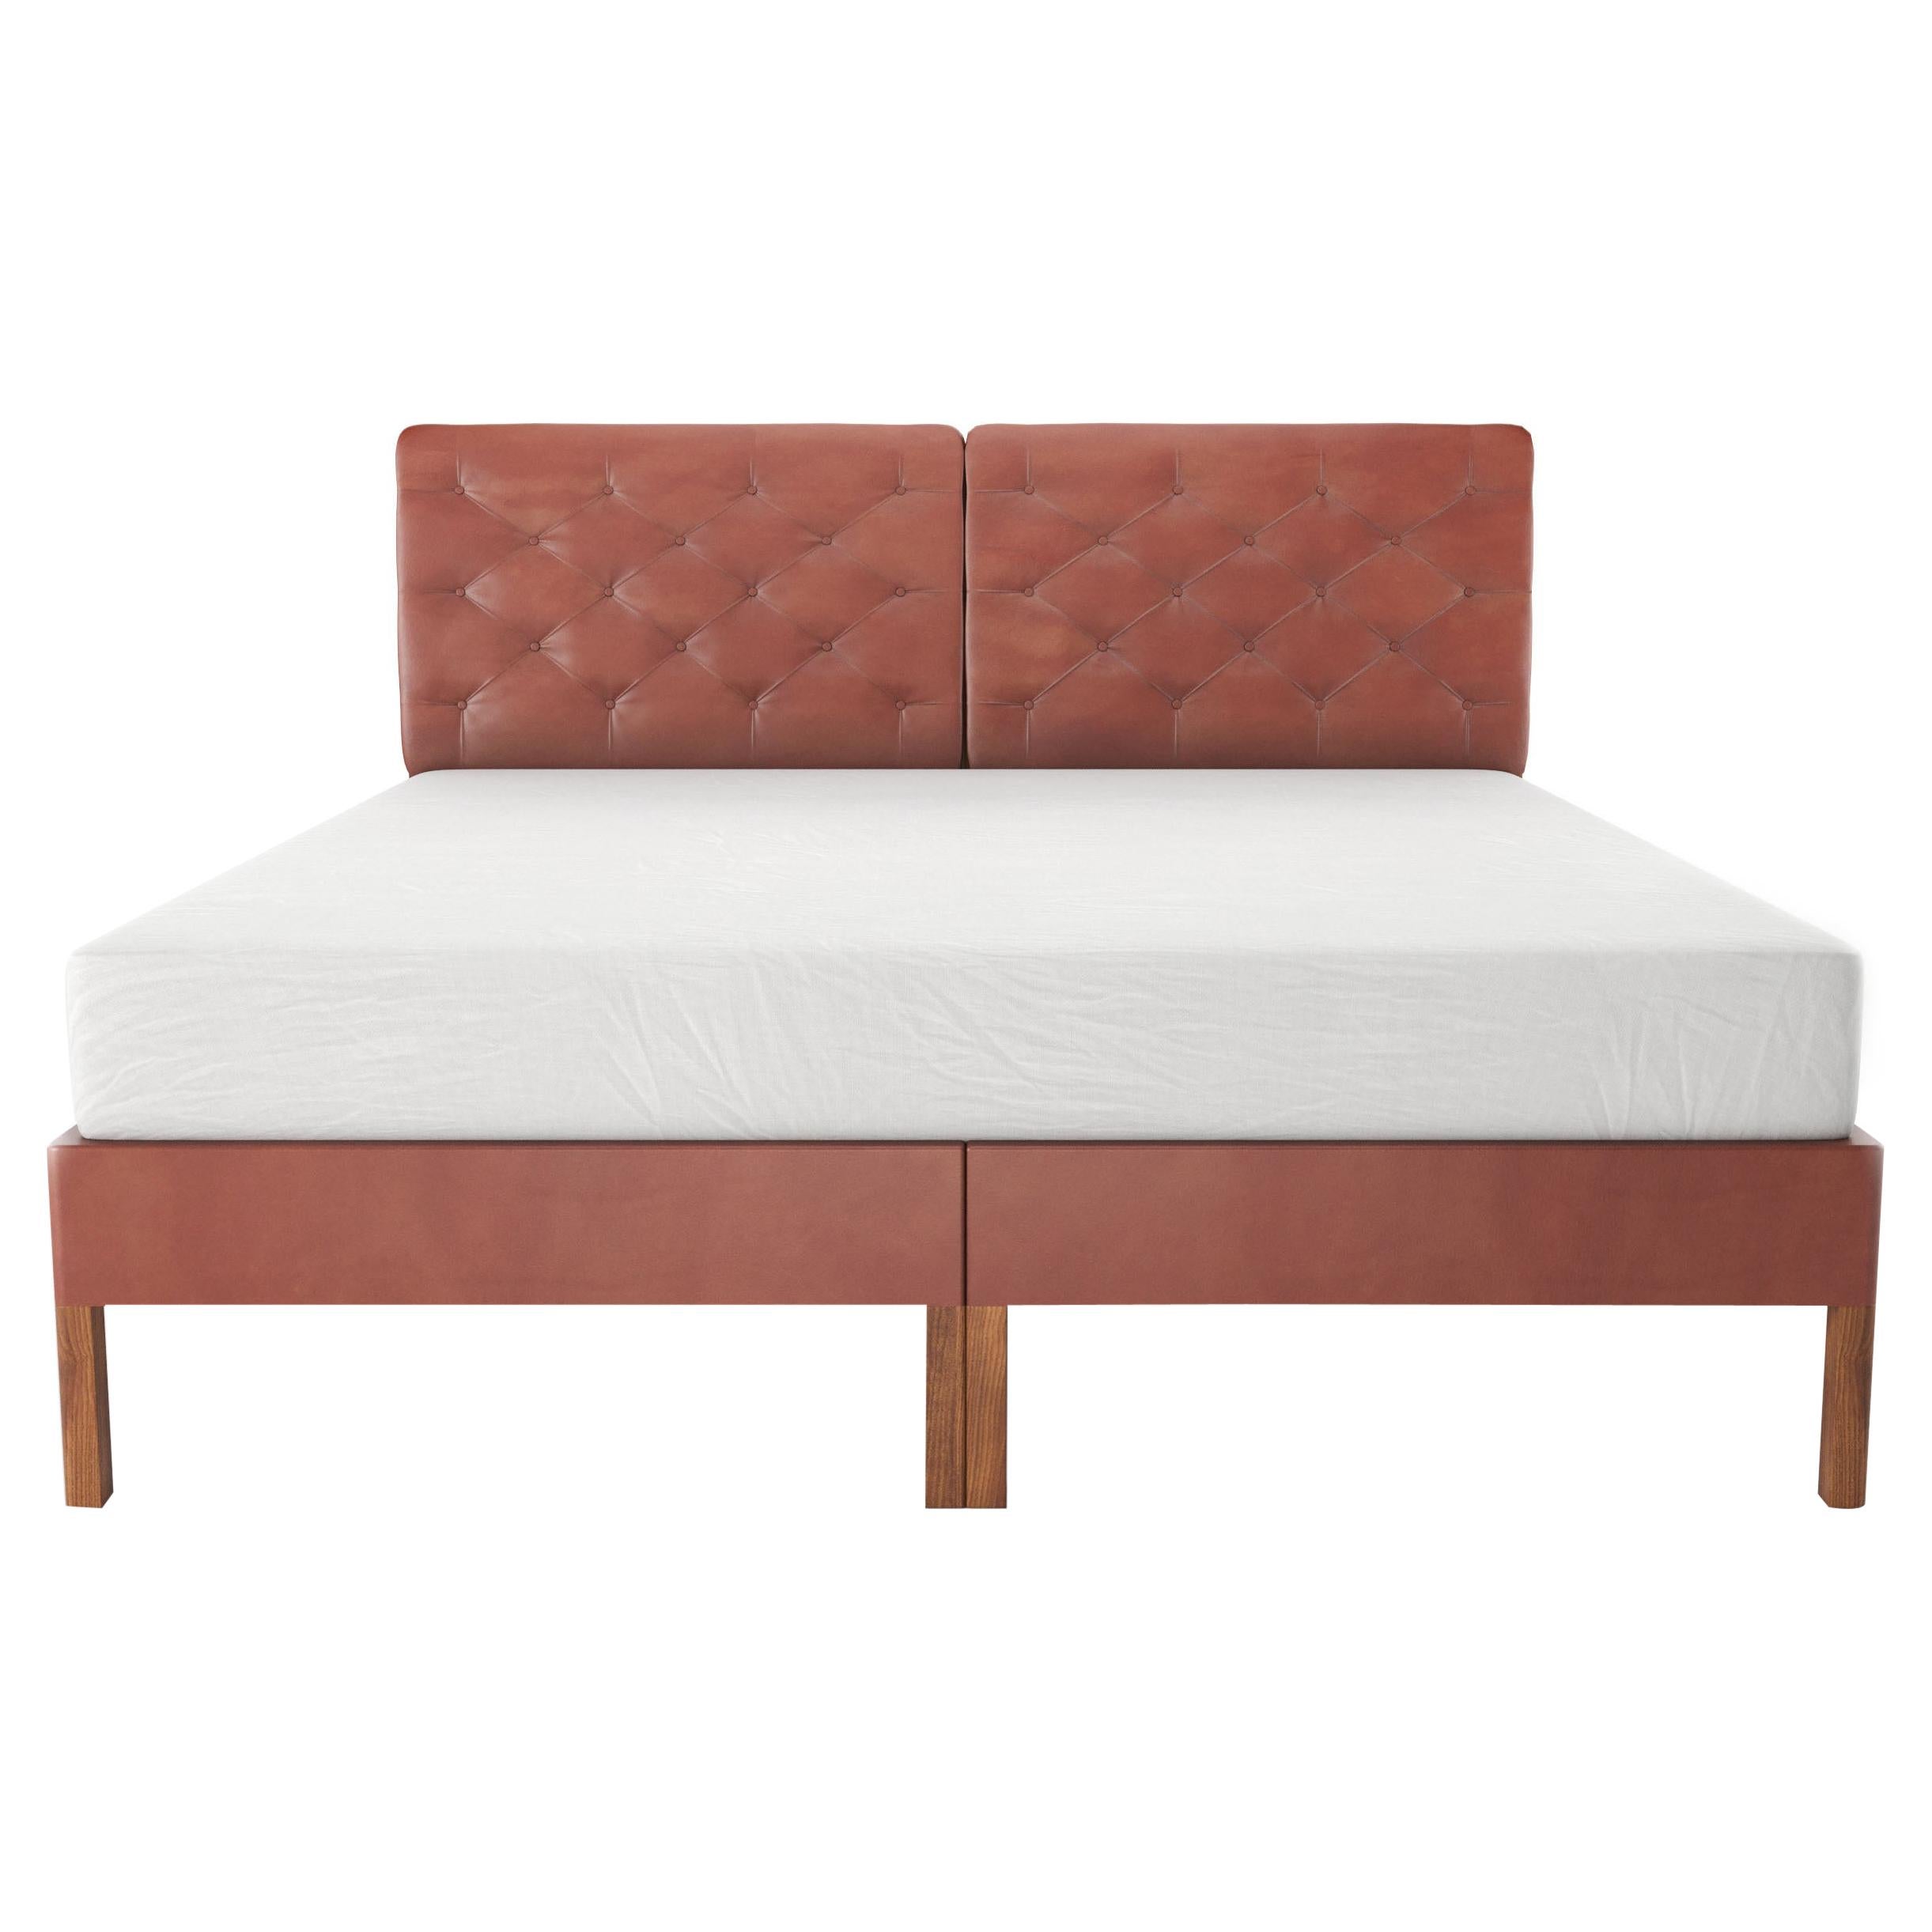 Tufted Bed Shown with Split Headboard on Wood Legs and Covered Rails For Sale